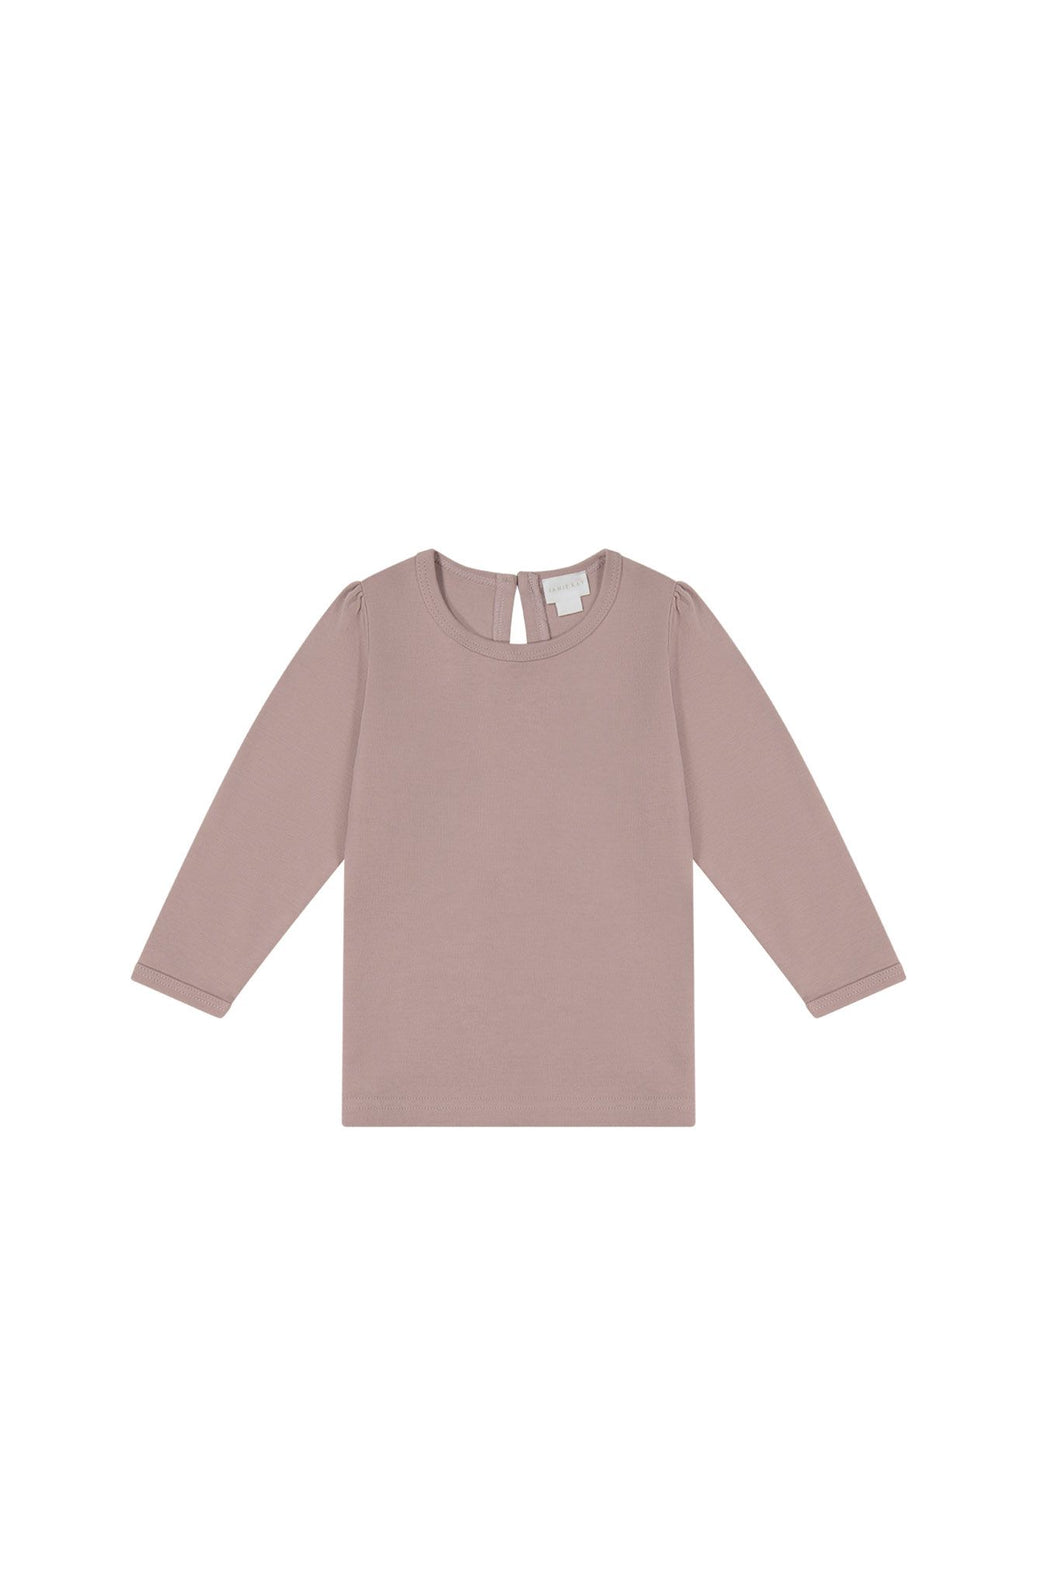 Mauve long sleeve top for 6-12months to 8 years